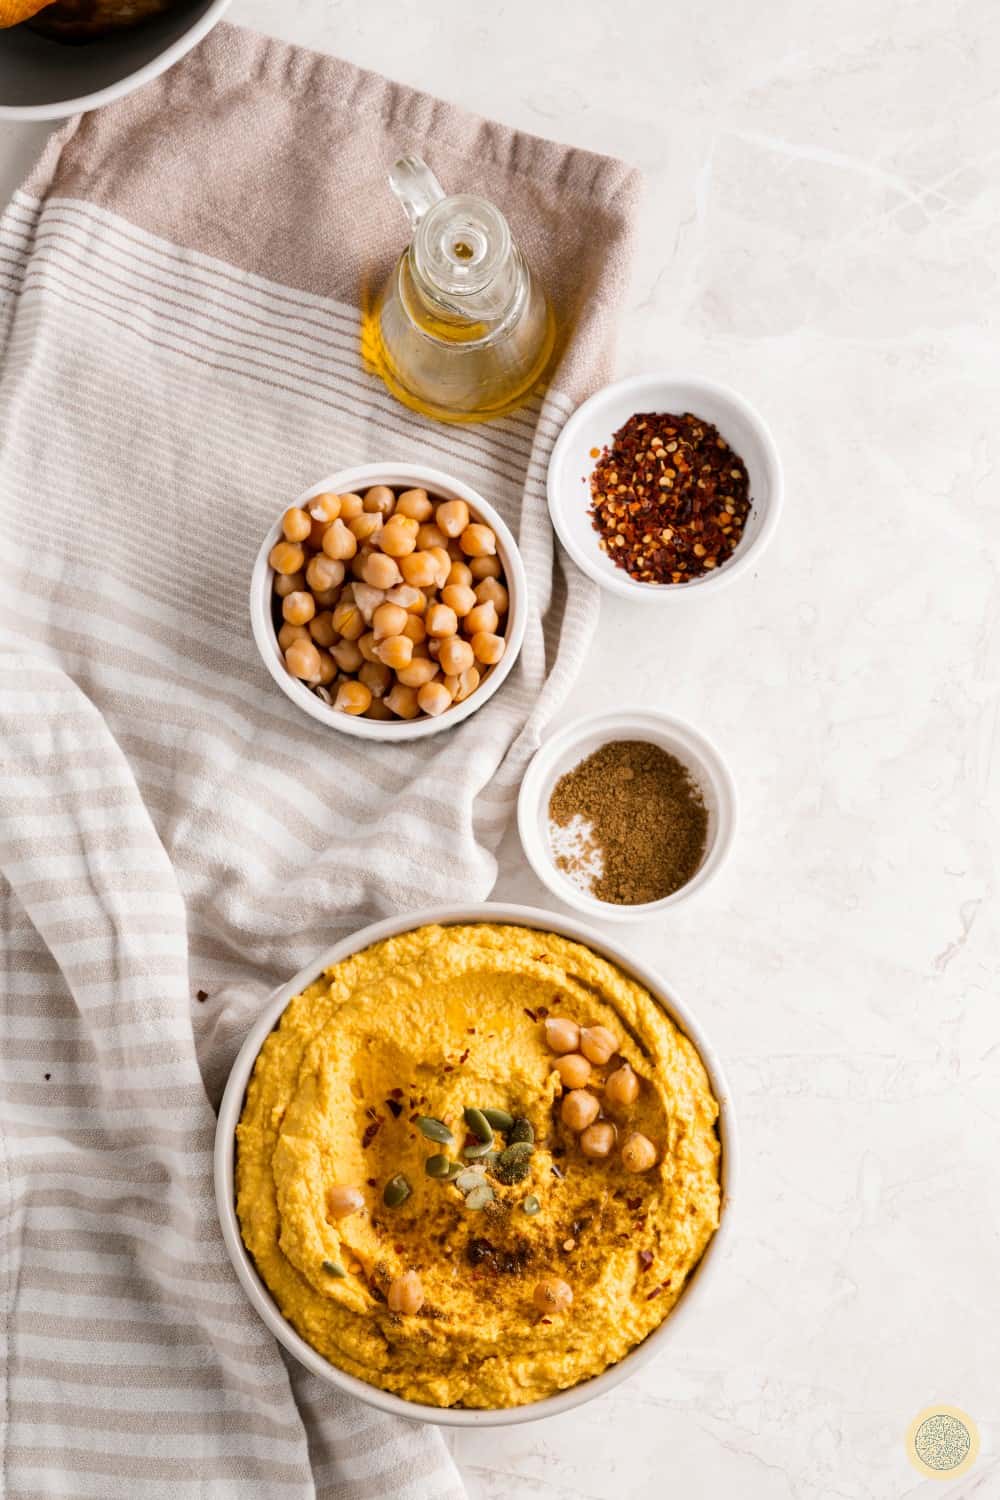 What to Eat With Hummus